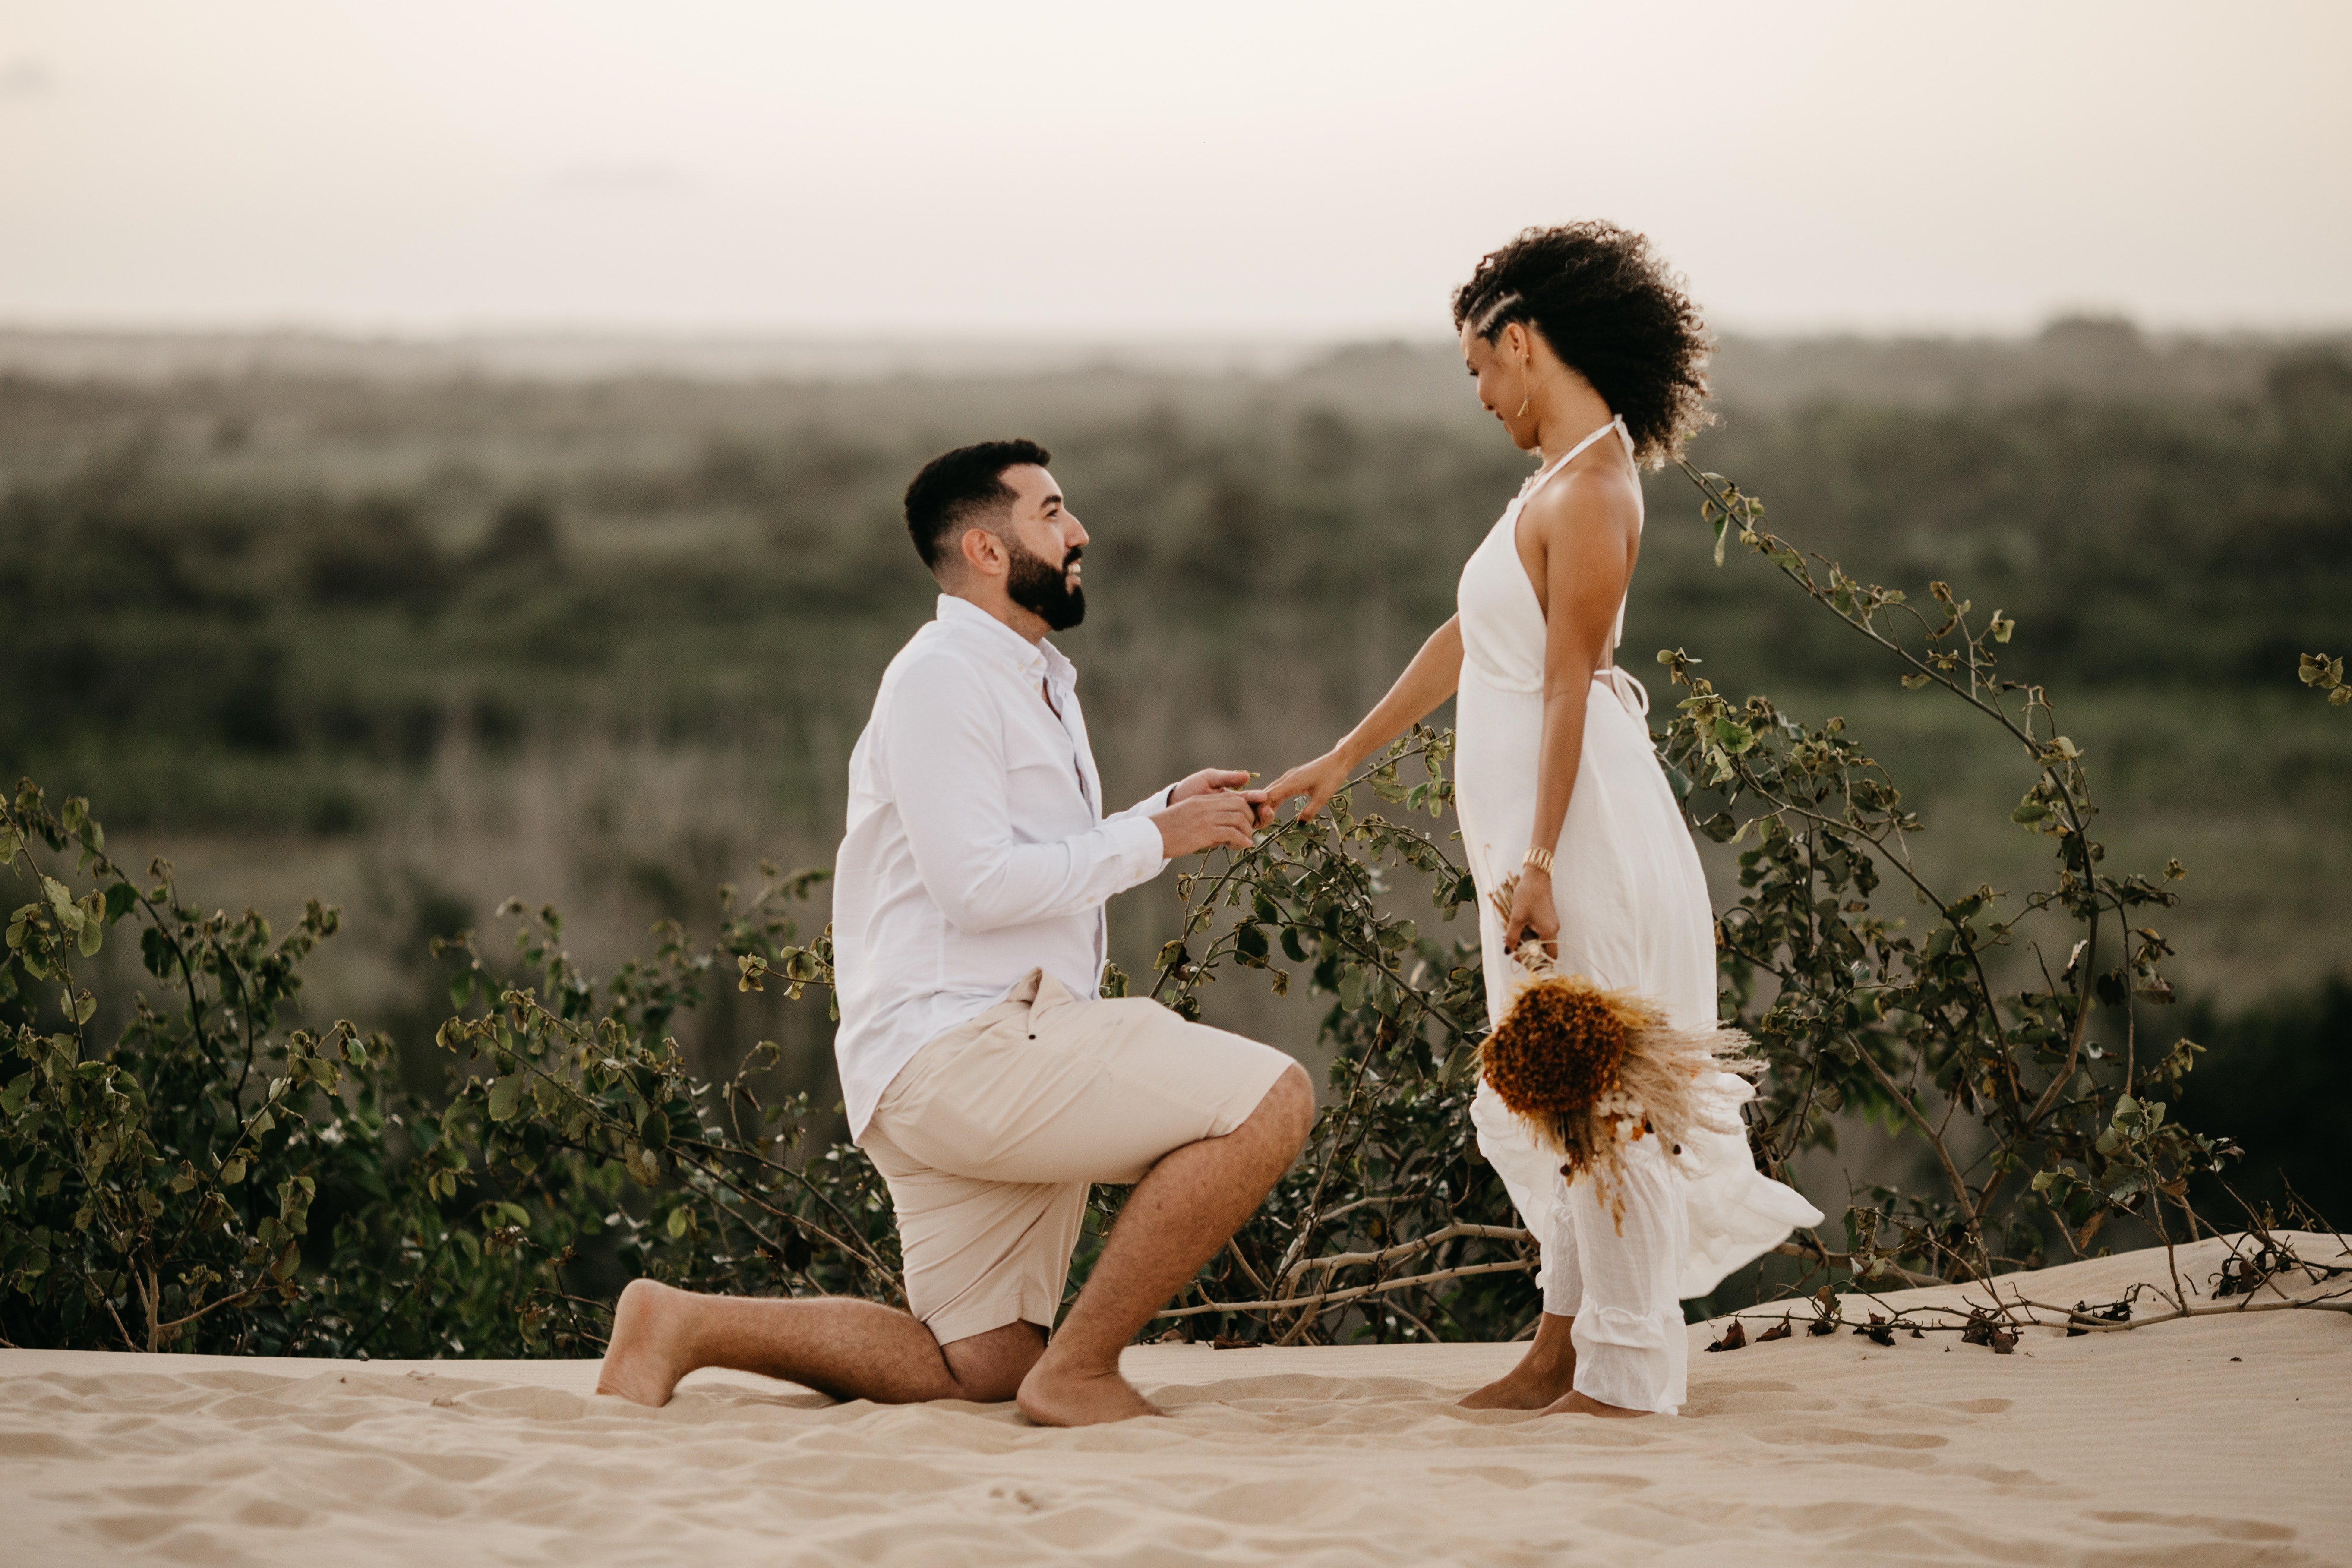 A man proposing to his partner. | Source: Pexels